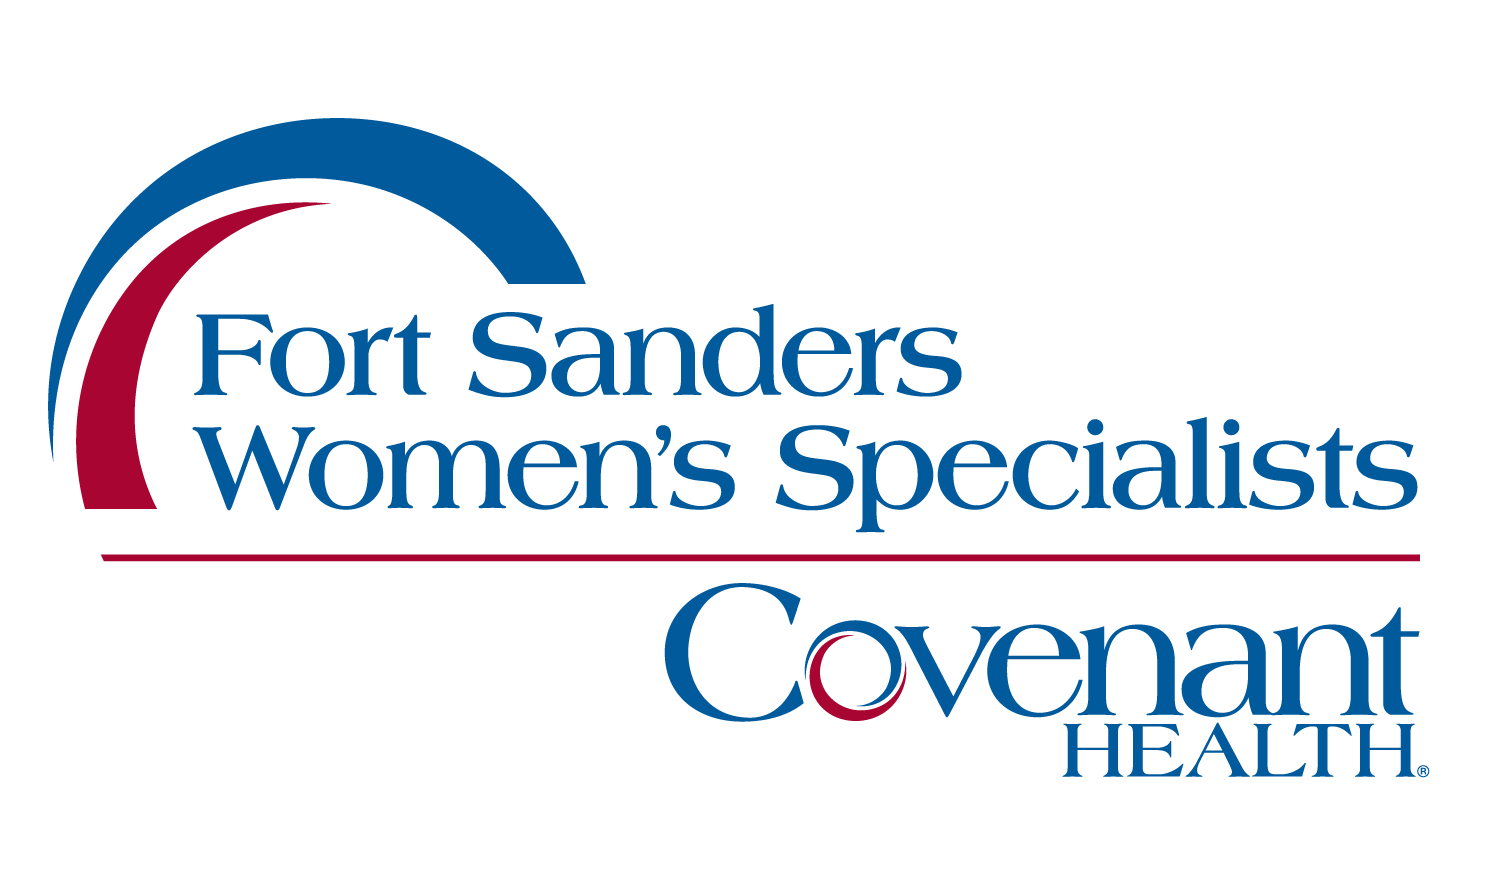 Fort Sanders Women’s Specialists - Covenant Health